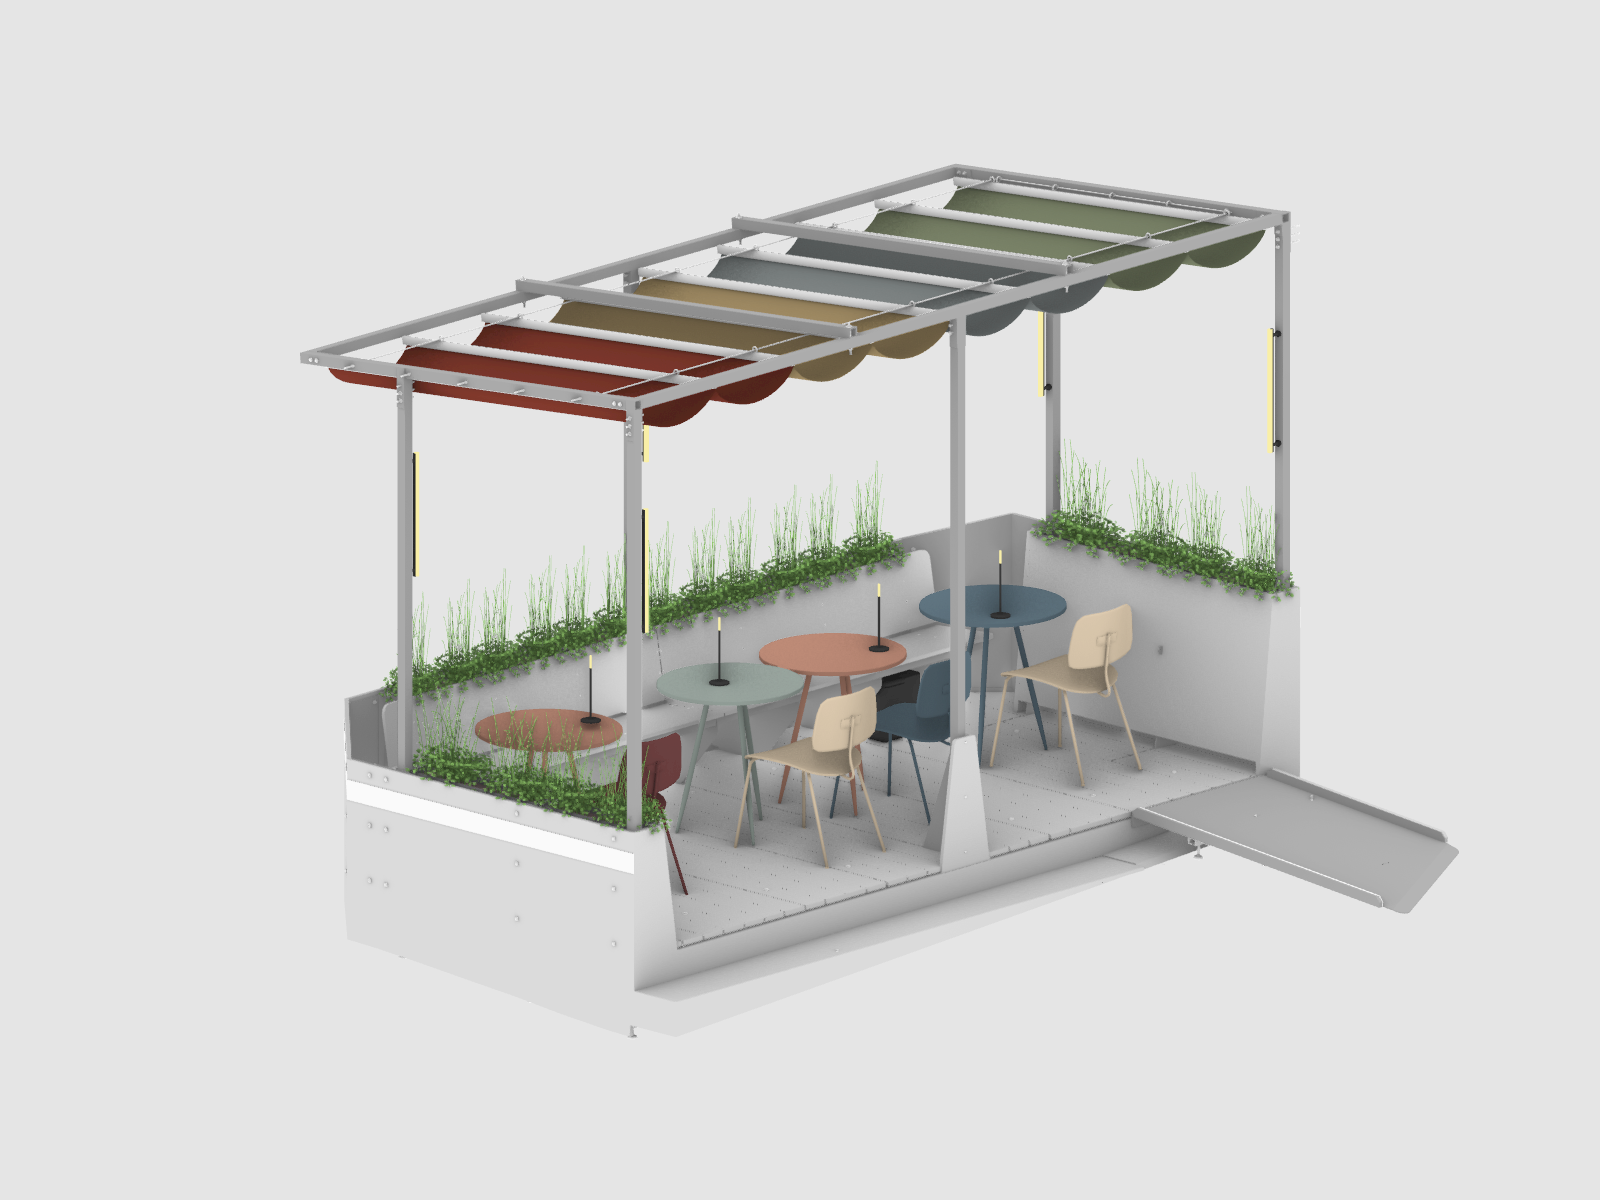 A roadway dining cafe with a colorful awning, tables and chairs, and a ramp to the flooring